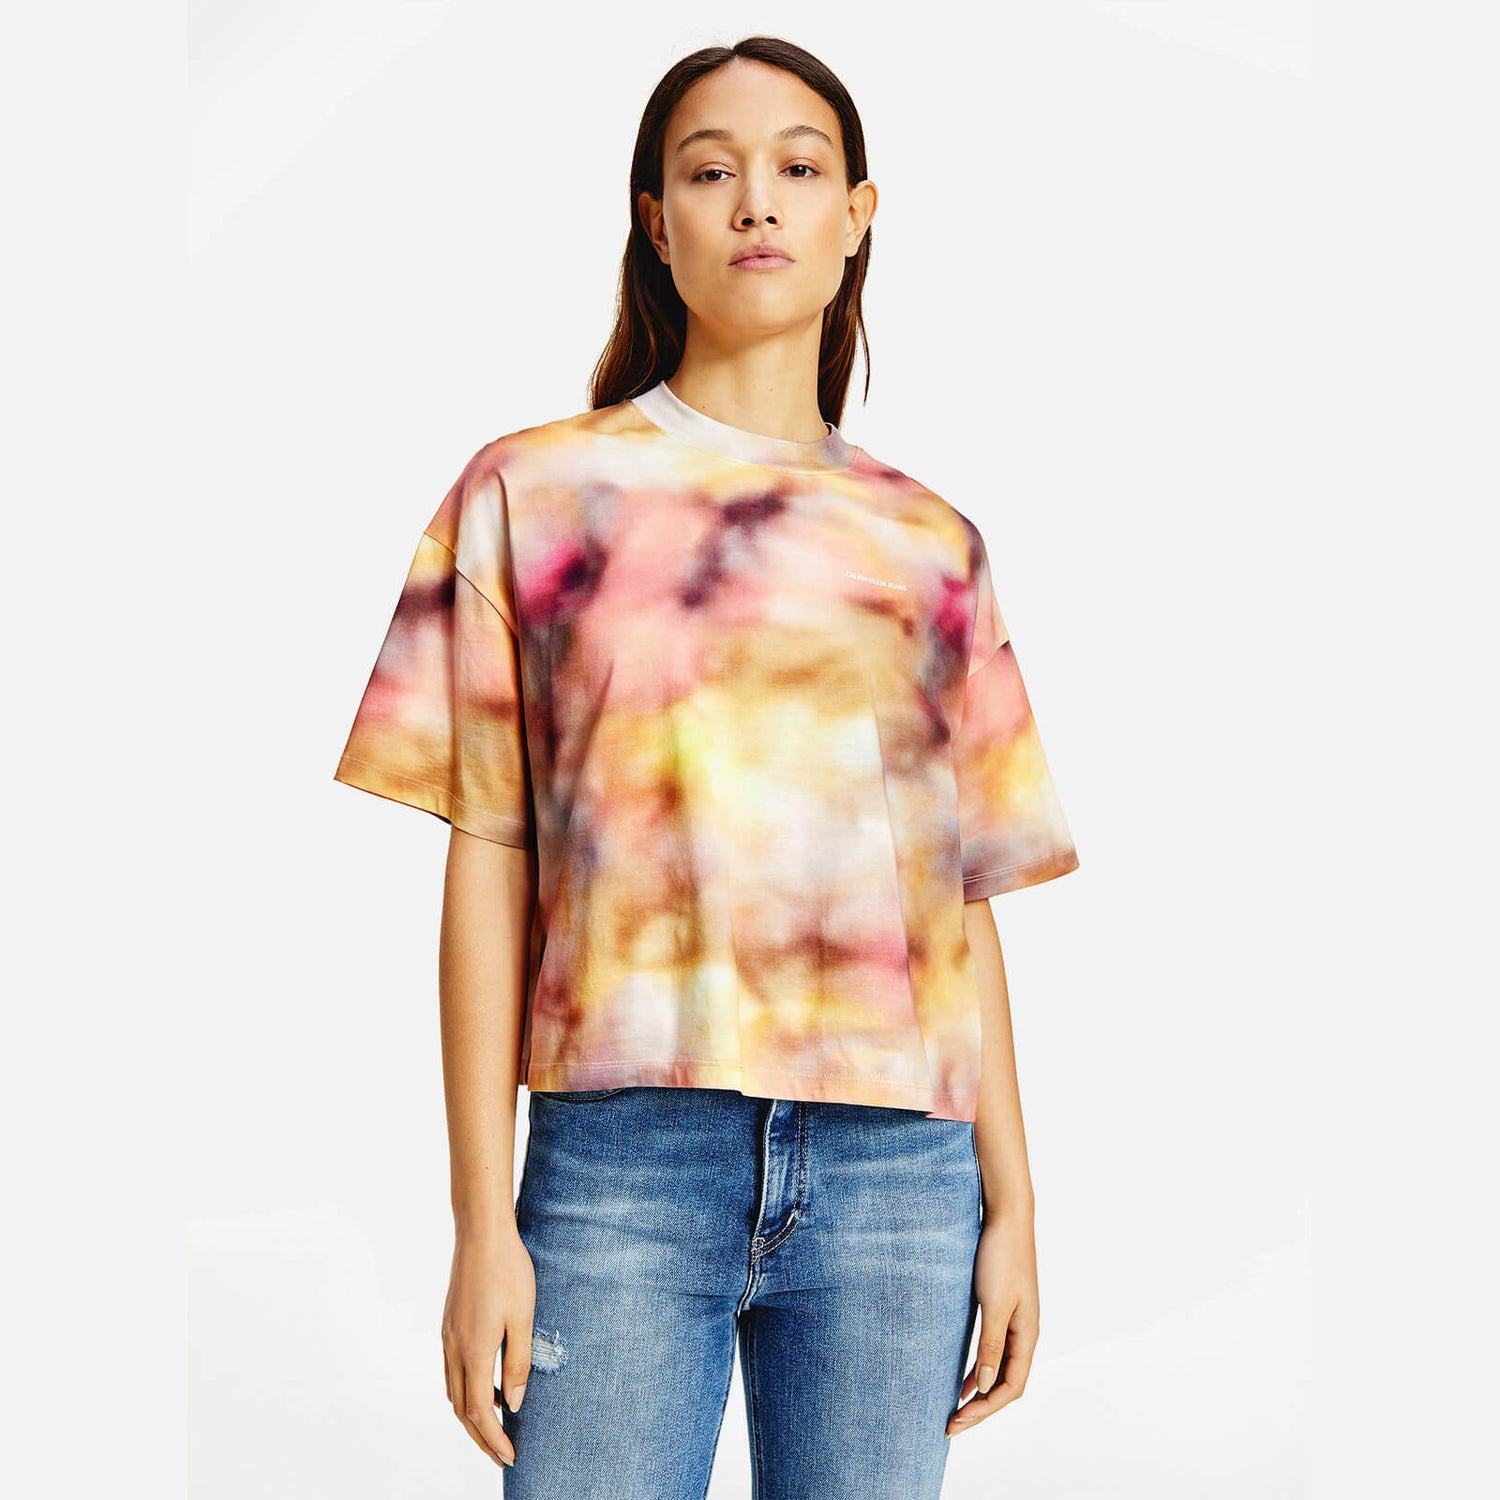 Calvin Klein Jeans Women's Organic Cotton All Over Print T-Shirt - Blurred Abstract Aop - XS